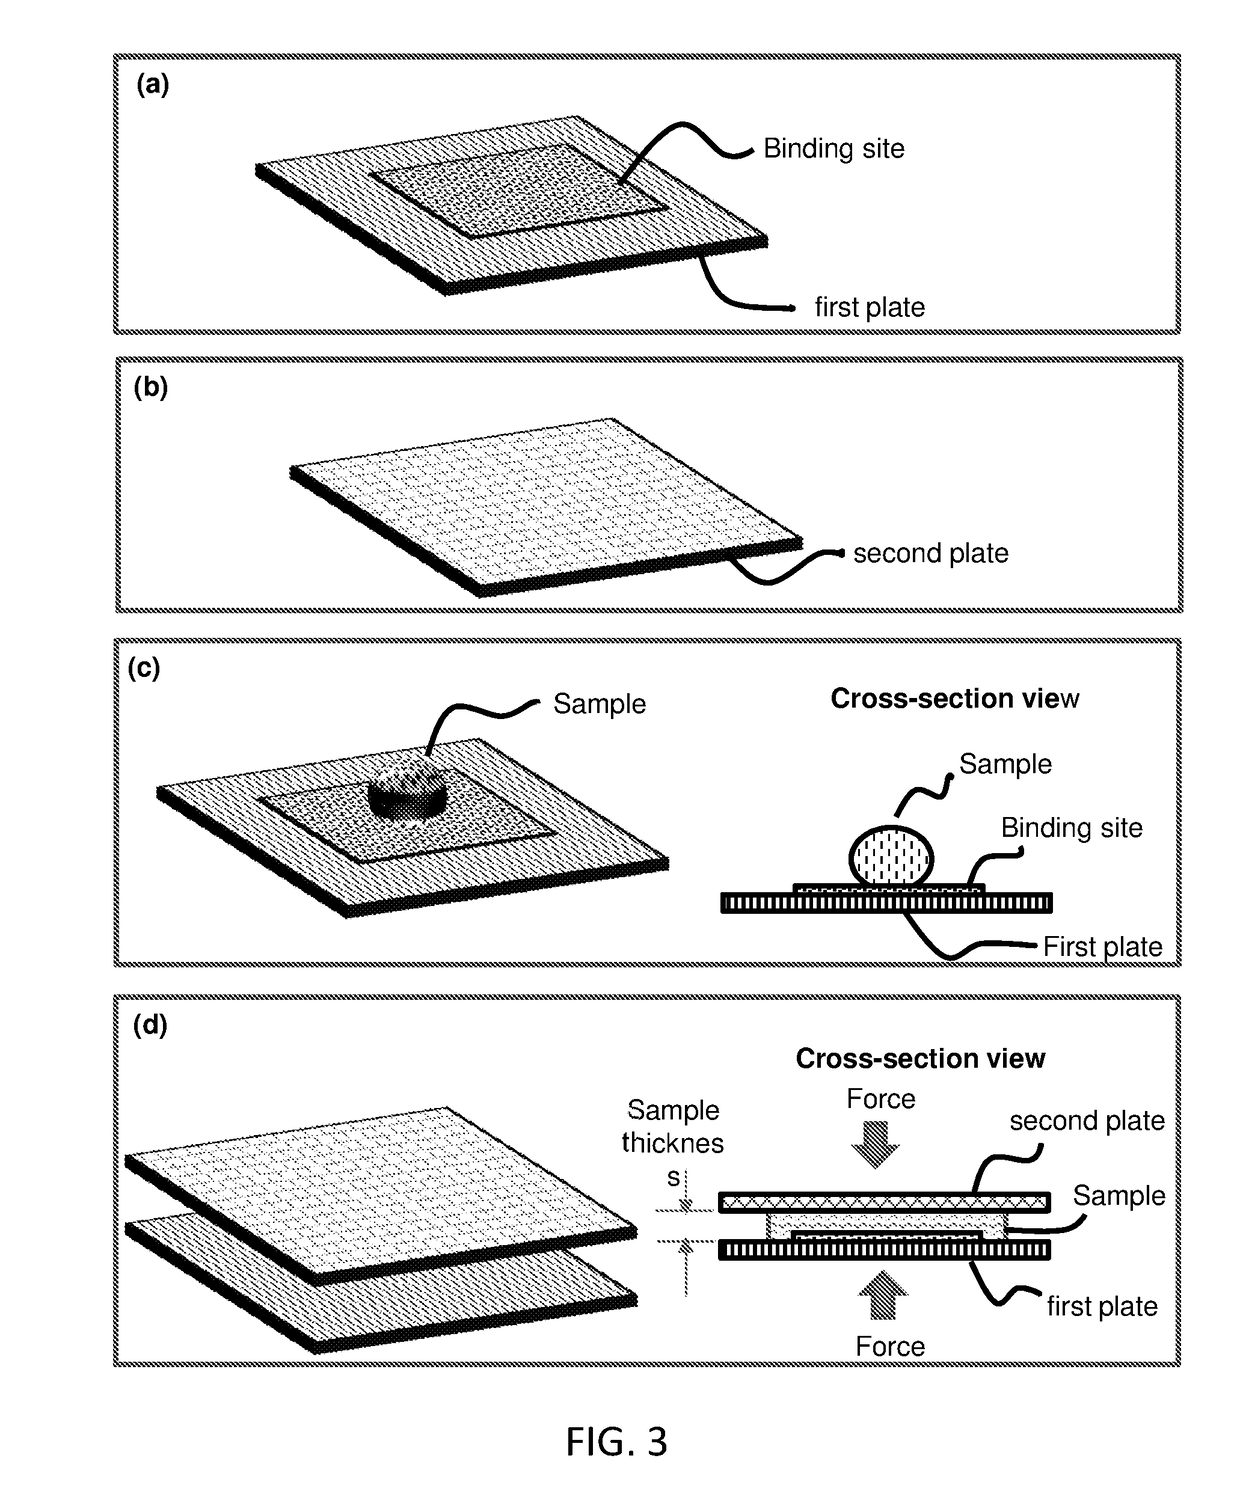 Bio/chemical assay devices and methods for simplified steps, small samples, accelerated speed, and ease-of-use